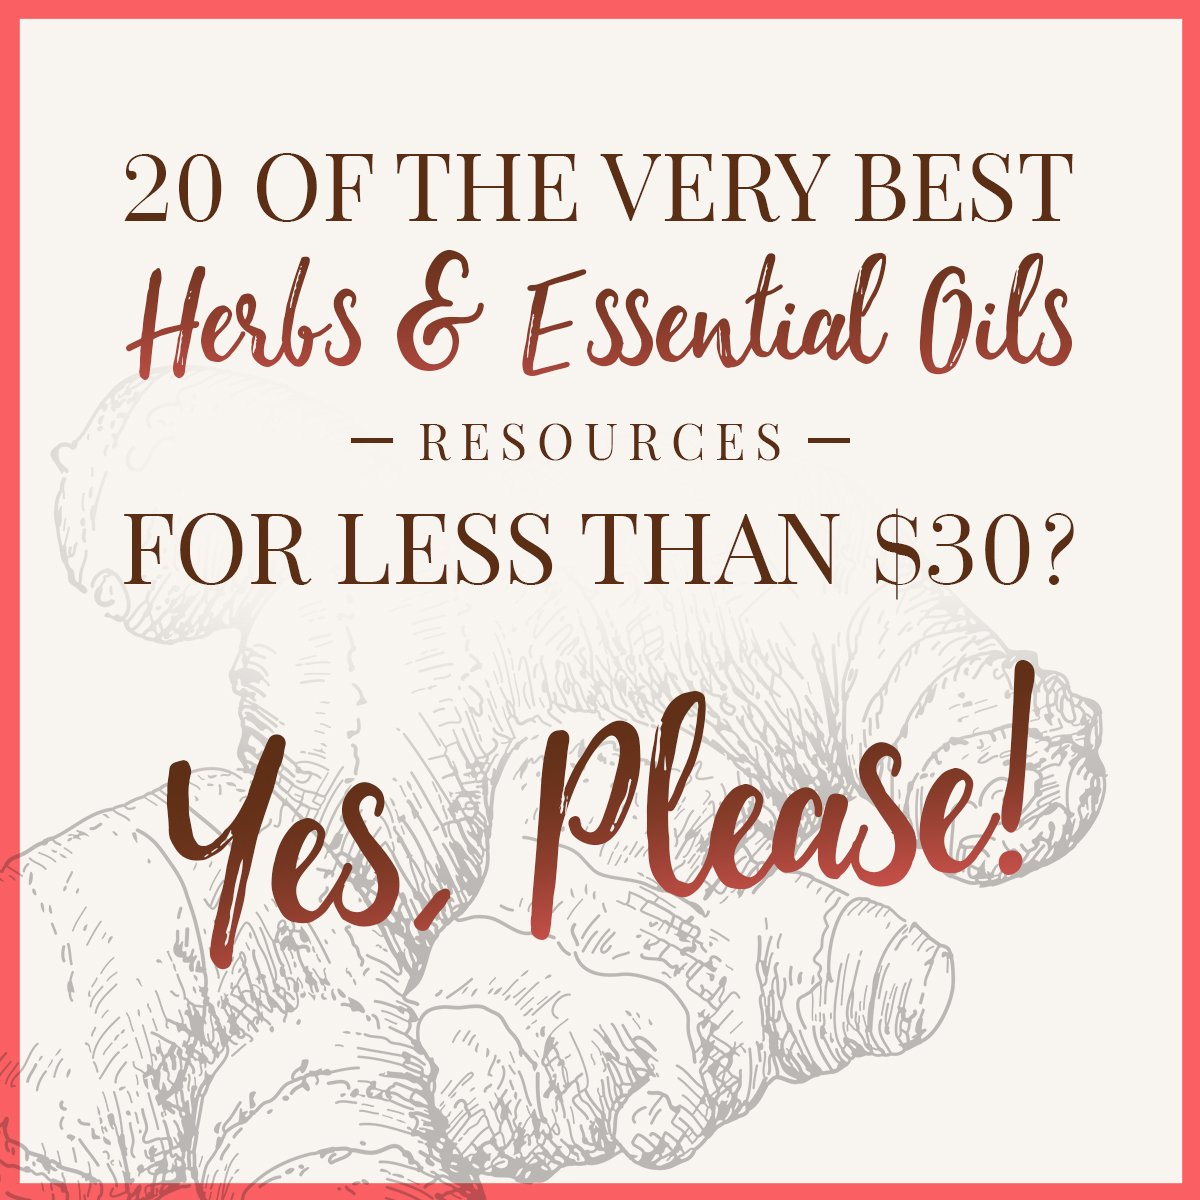 Grab the Herbs & Essential Oils Super Bundle while you can!